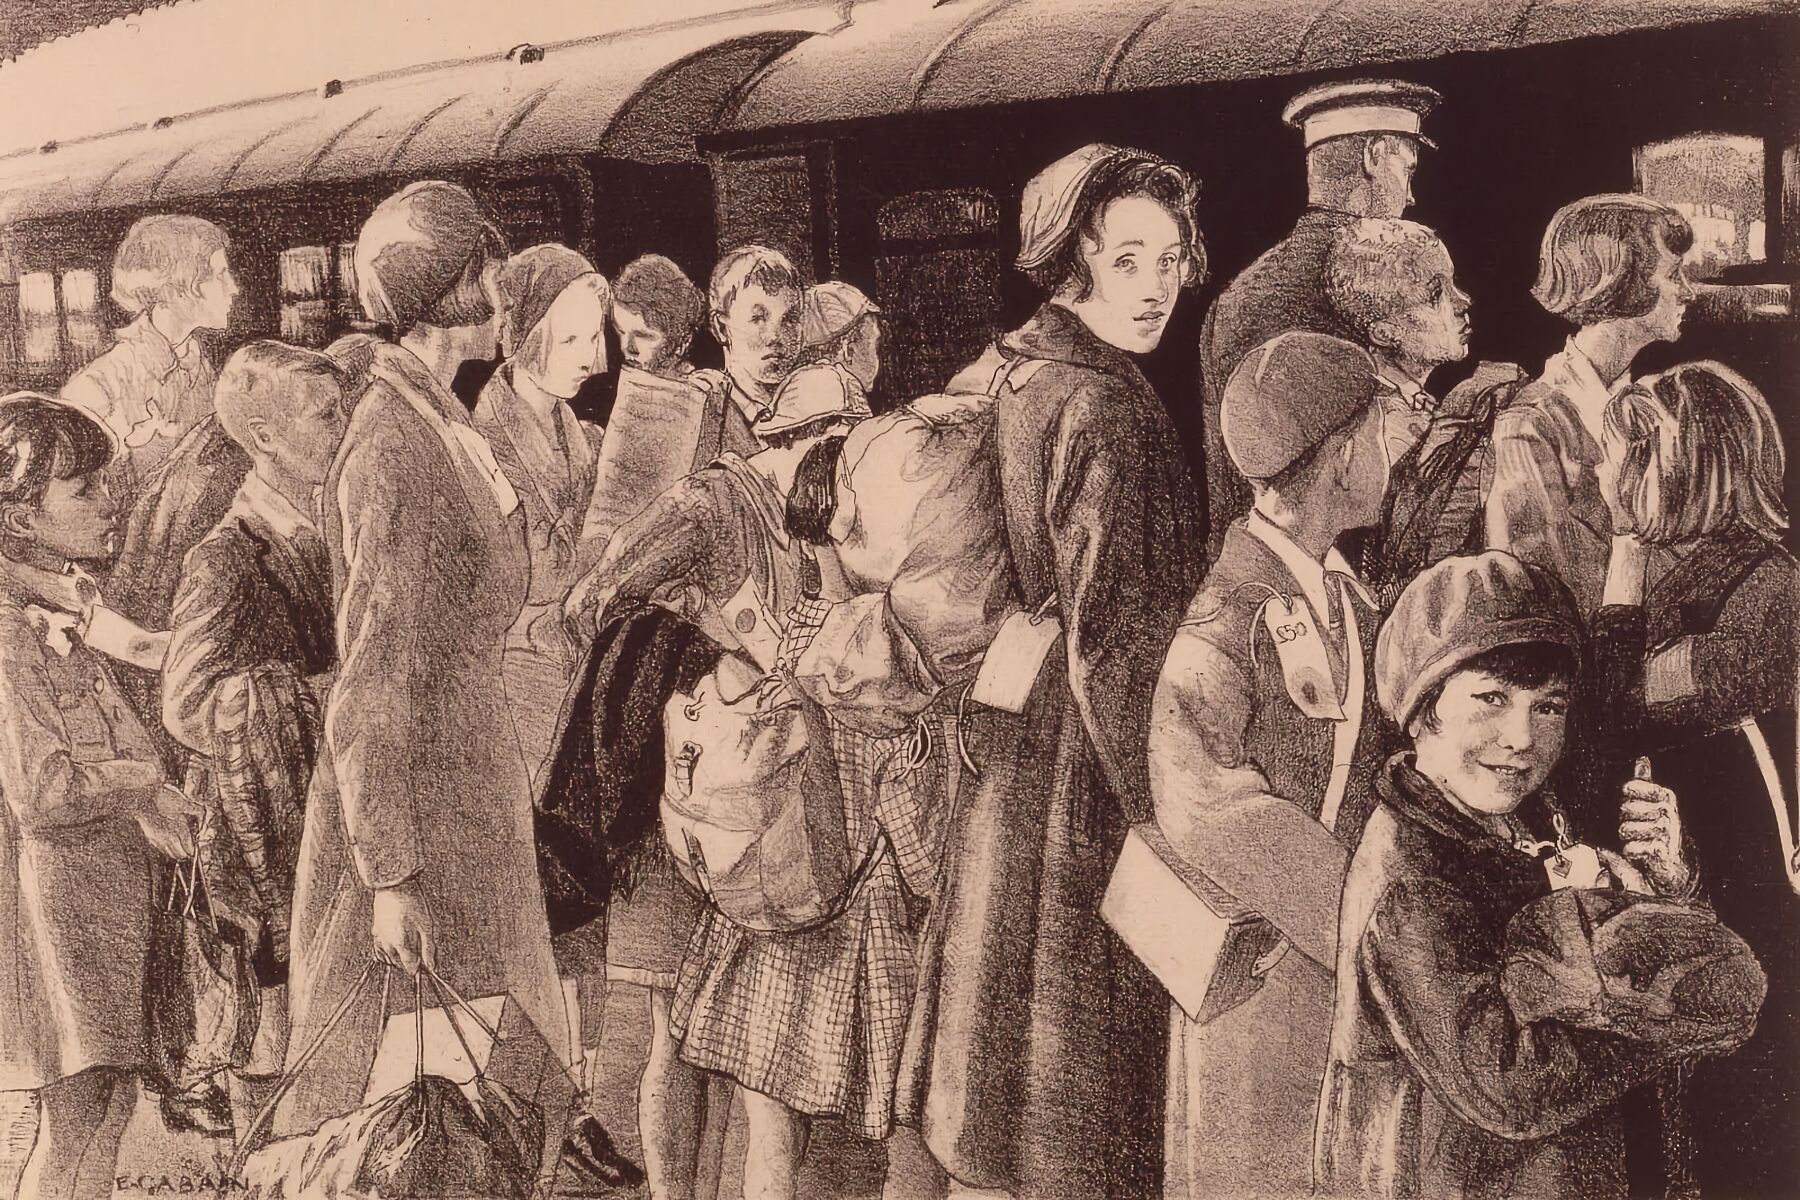 The Evacuation of Children from Southend by Ethel L. Gabain - 2nd June 1940 